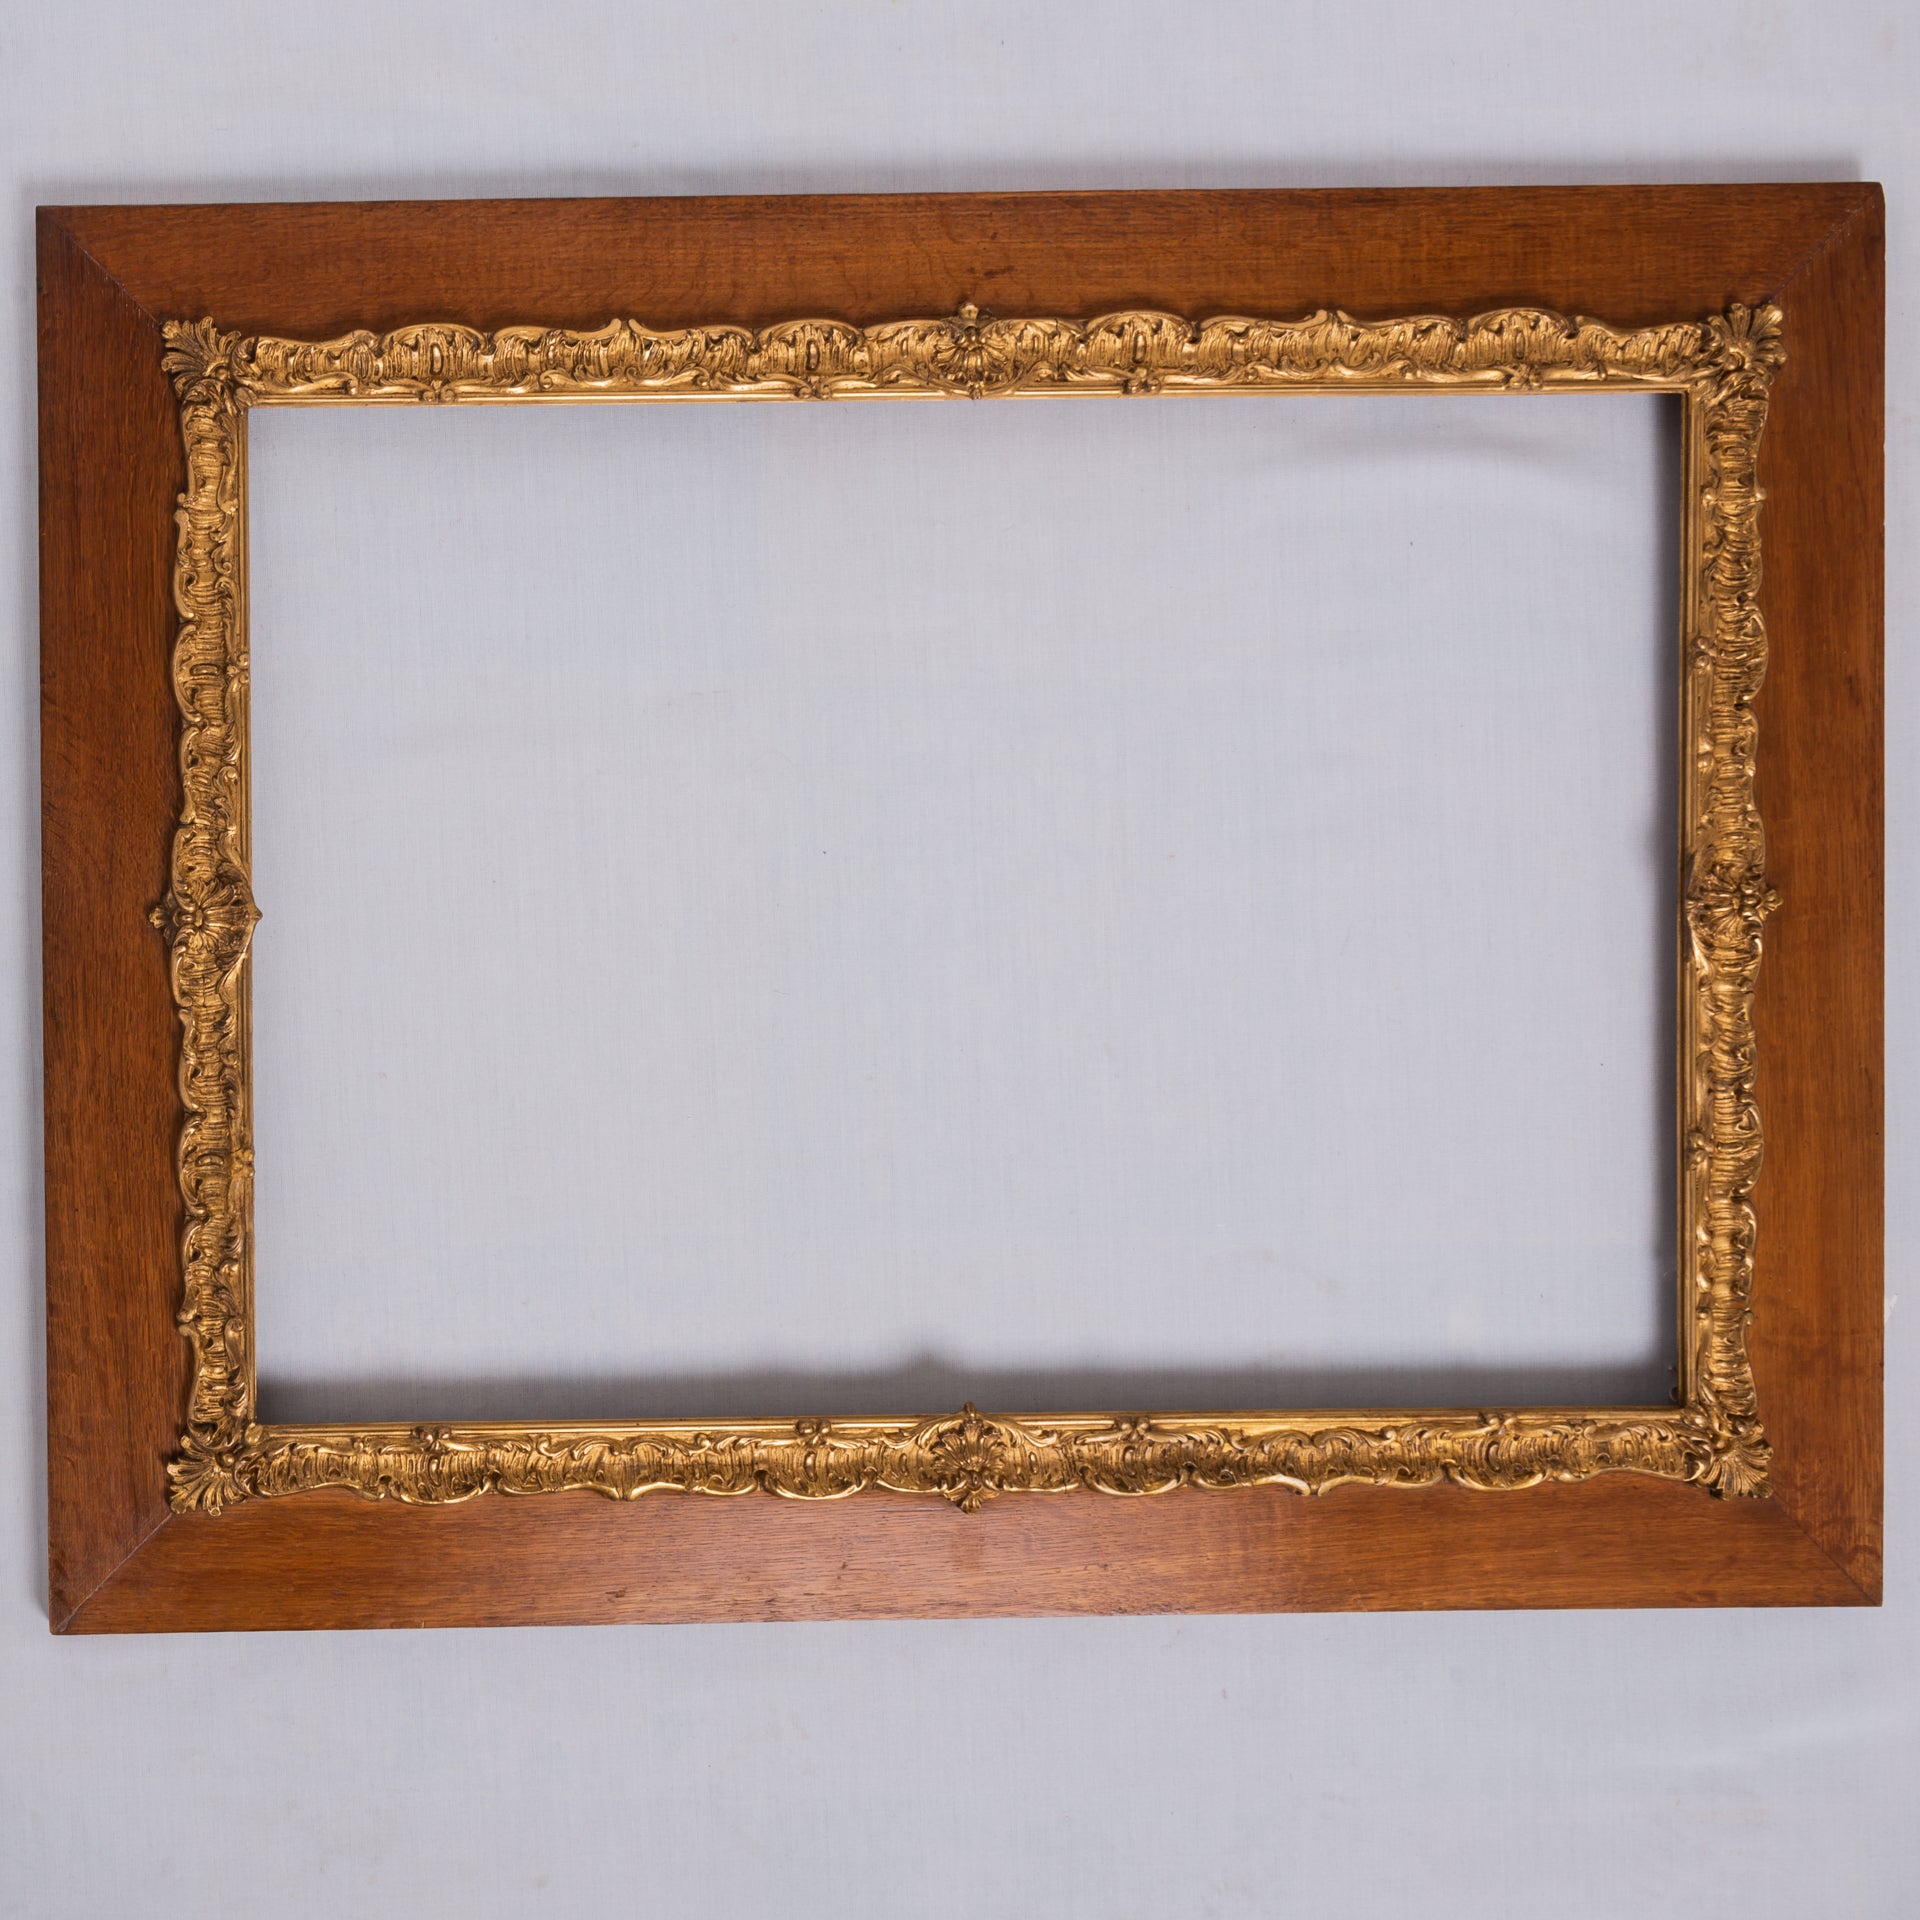 O/4665 - Pair of large wood frames with internal part in carved and gilded wood - 
Perfect for a pair of paintings or mirrors.